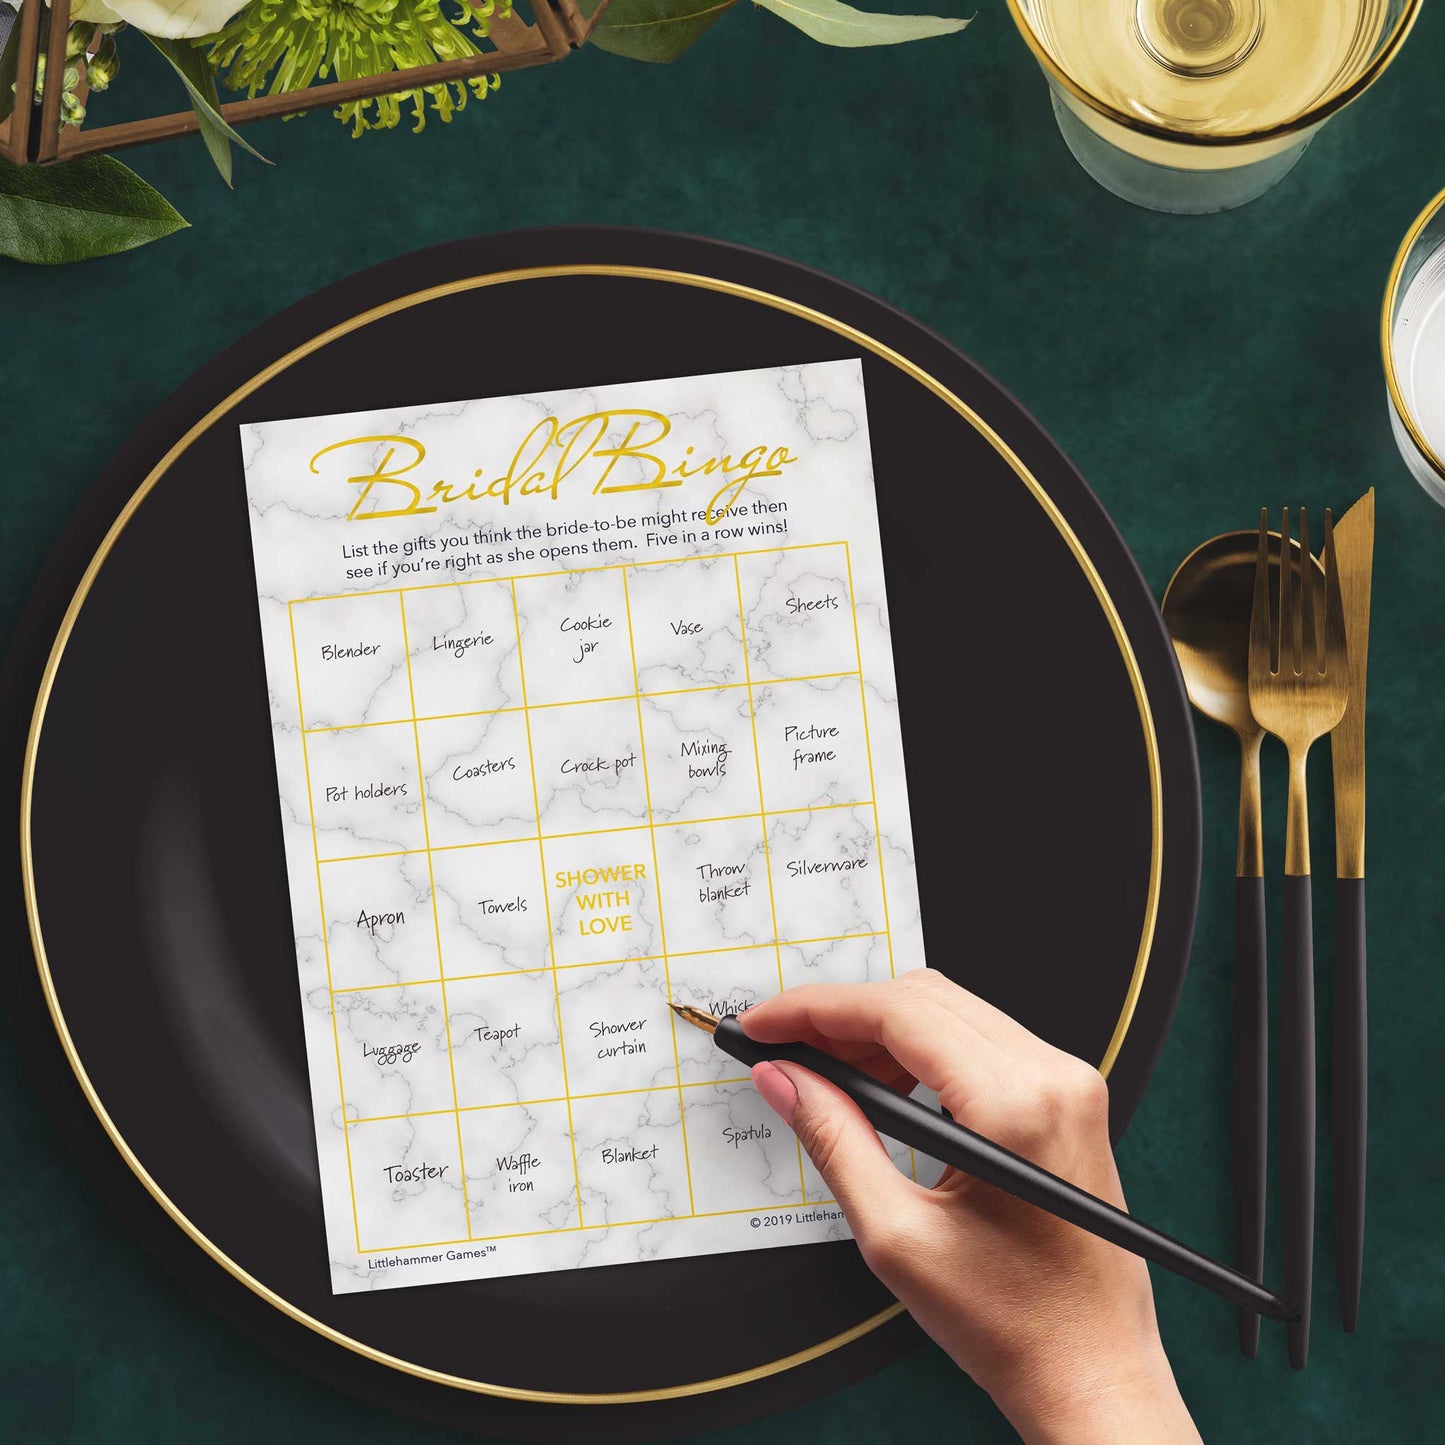 Woman with a pen sitting at a dark place setting with a black and gold plate filling out a gold and marble Bridal Gift Bingo card